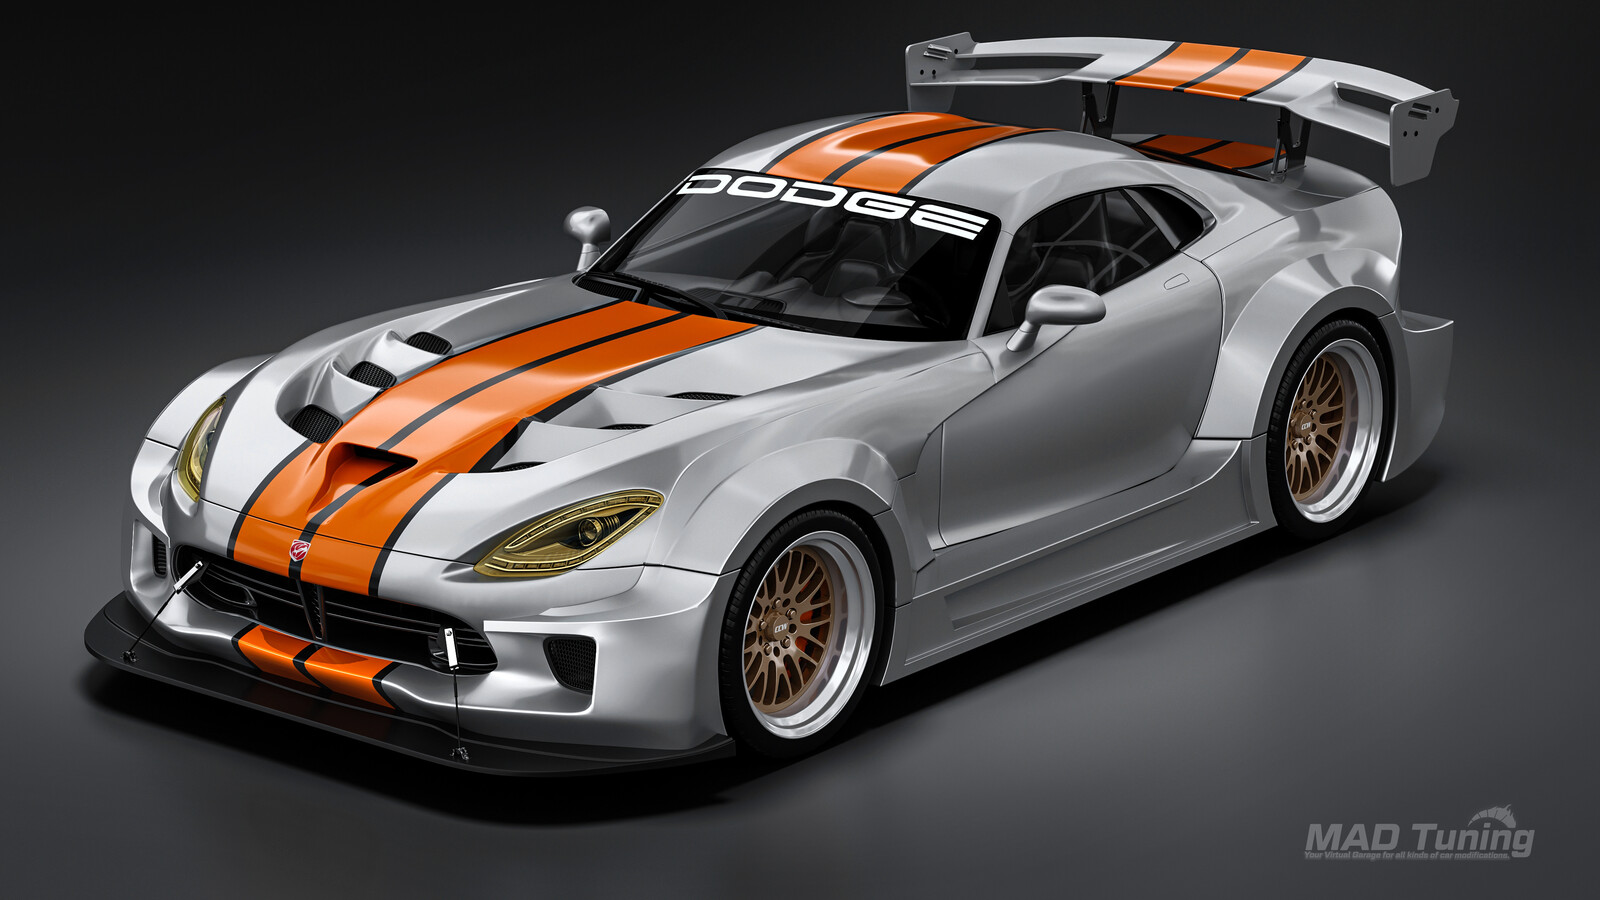 Dodge Viper ACR 2016 custom racing wide body kit - different color scheme